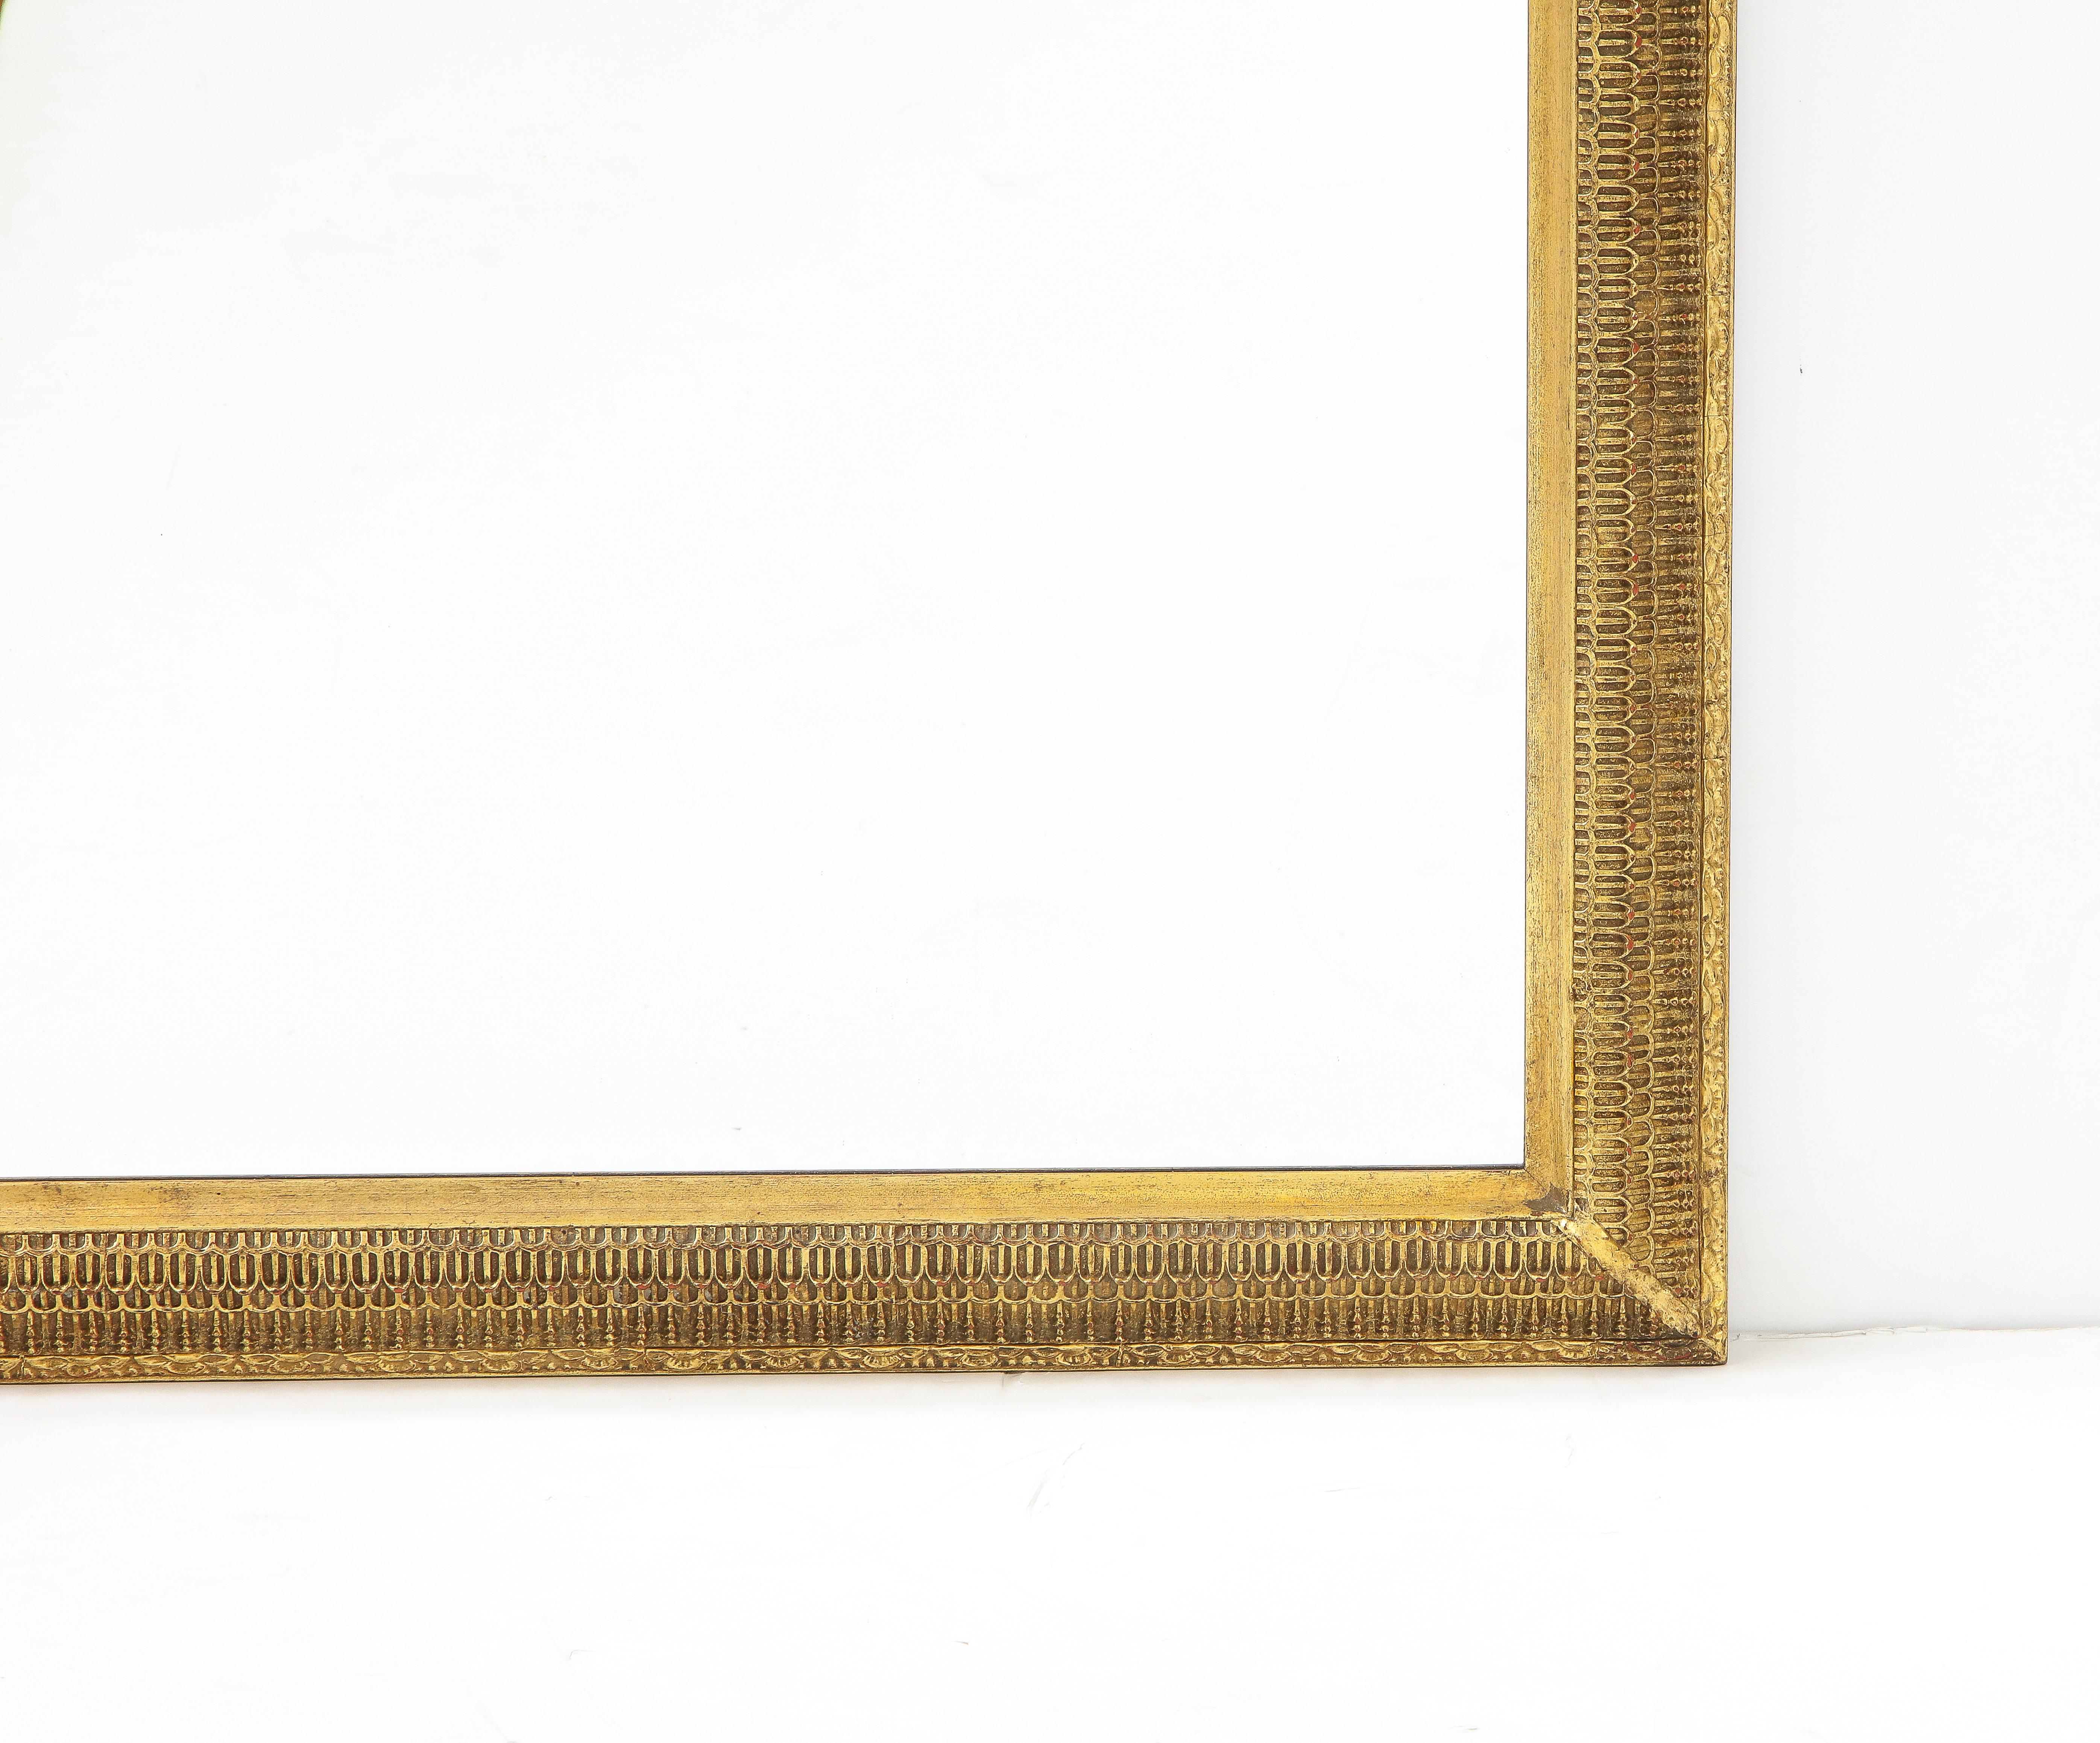 1950's Hollywood Regency style gilt-wood wall mirror by D.Milch & Son, in vintage original condition with minor wear and patina due to age and use.